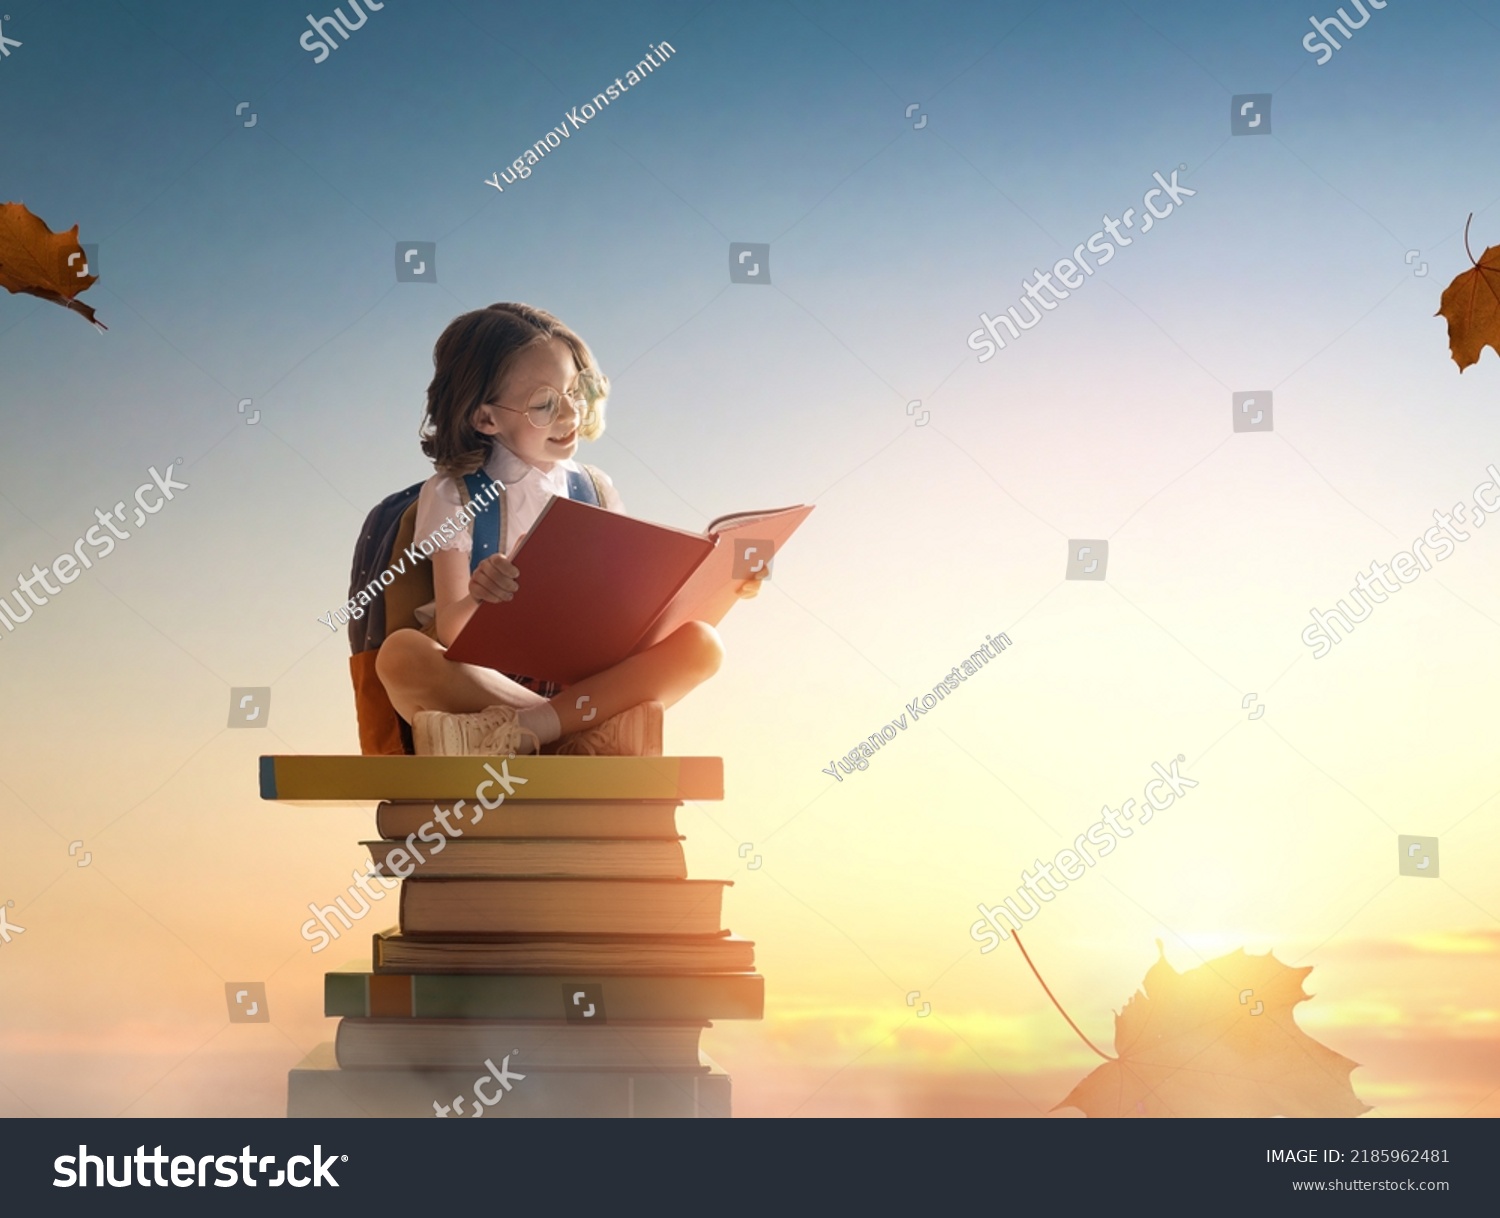 Back to school! Happy cute industrious child sitting on the tower of books on background of sunset sky. Concept of education and reading. The development of the imagination. #2185962481